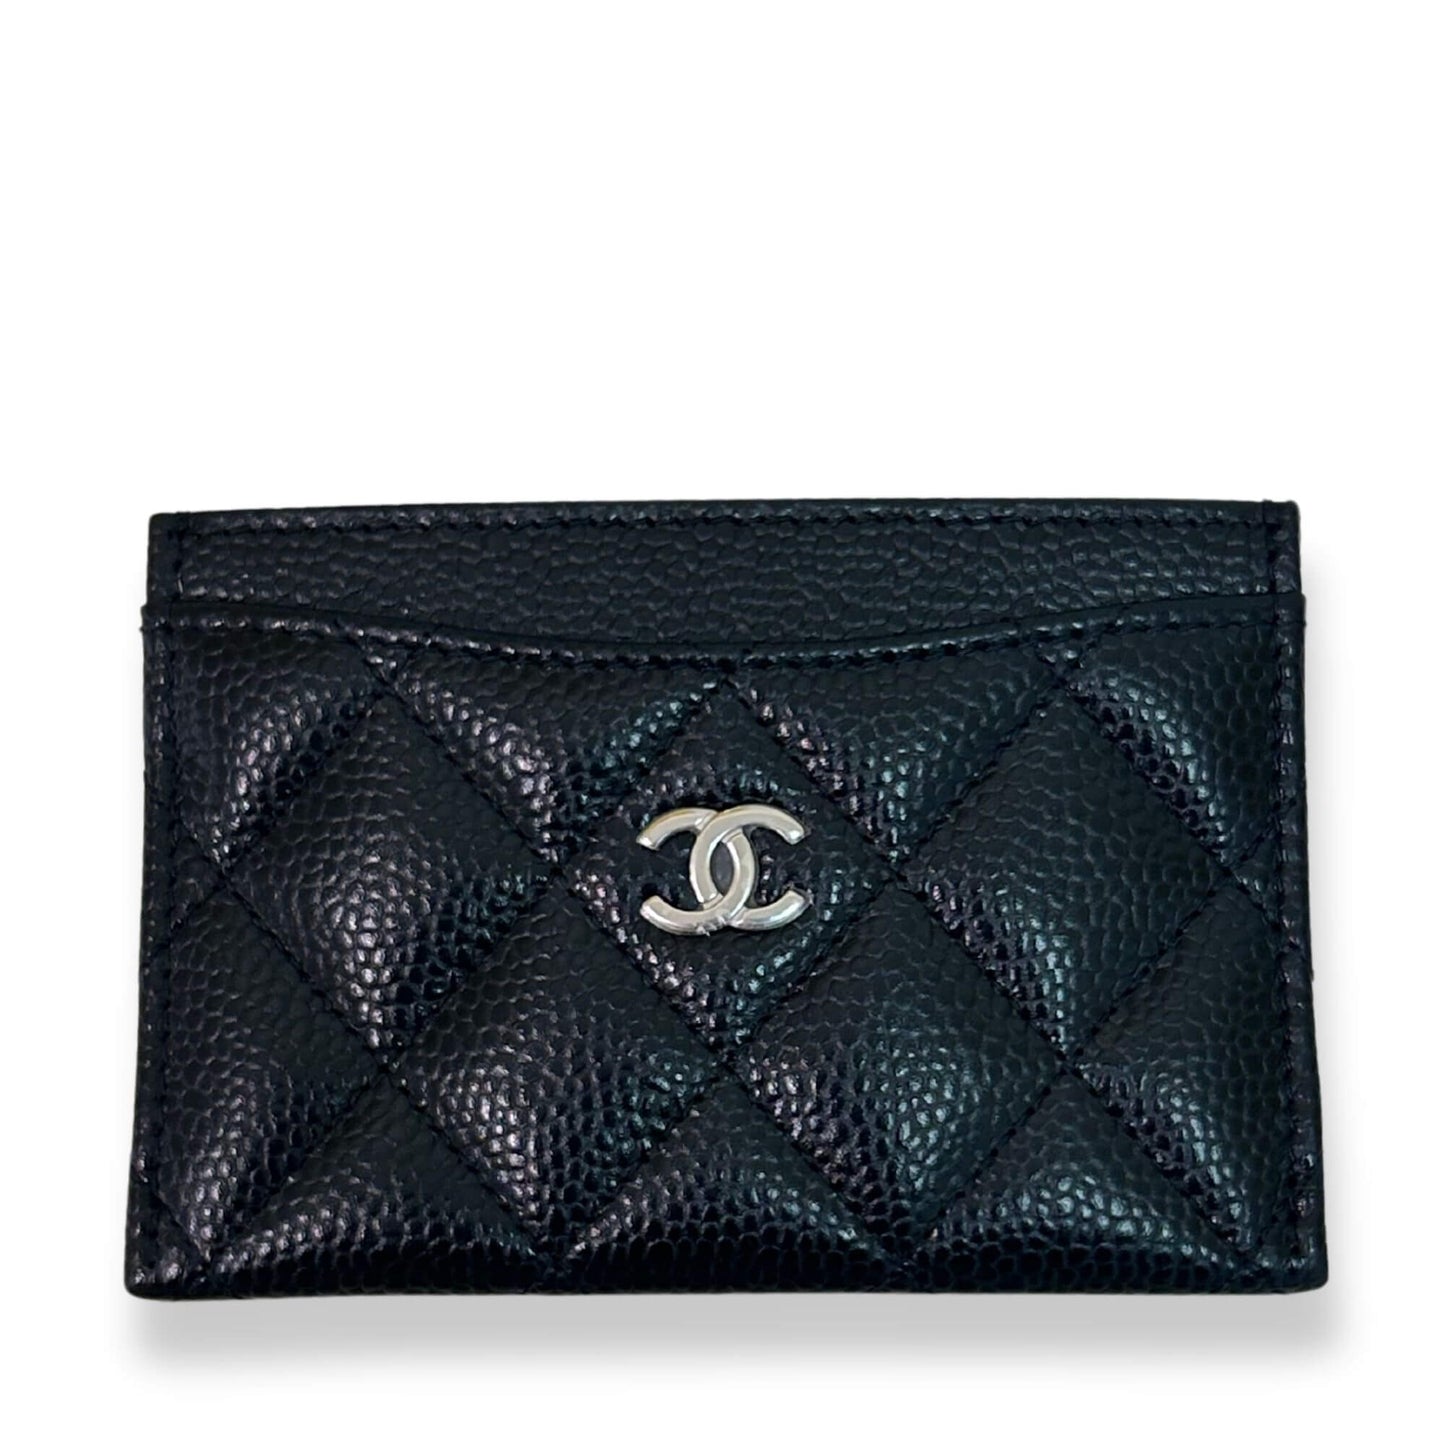 CHANEL BLACK LEATHER CLASSIC CARDHOLDER